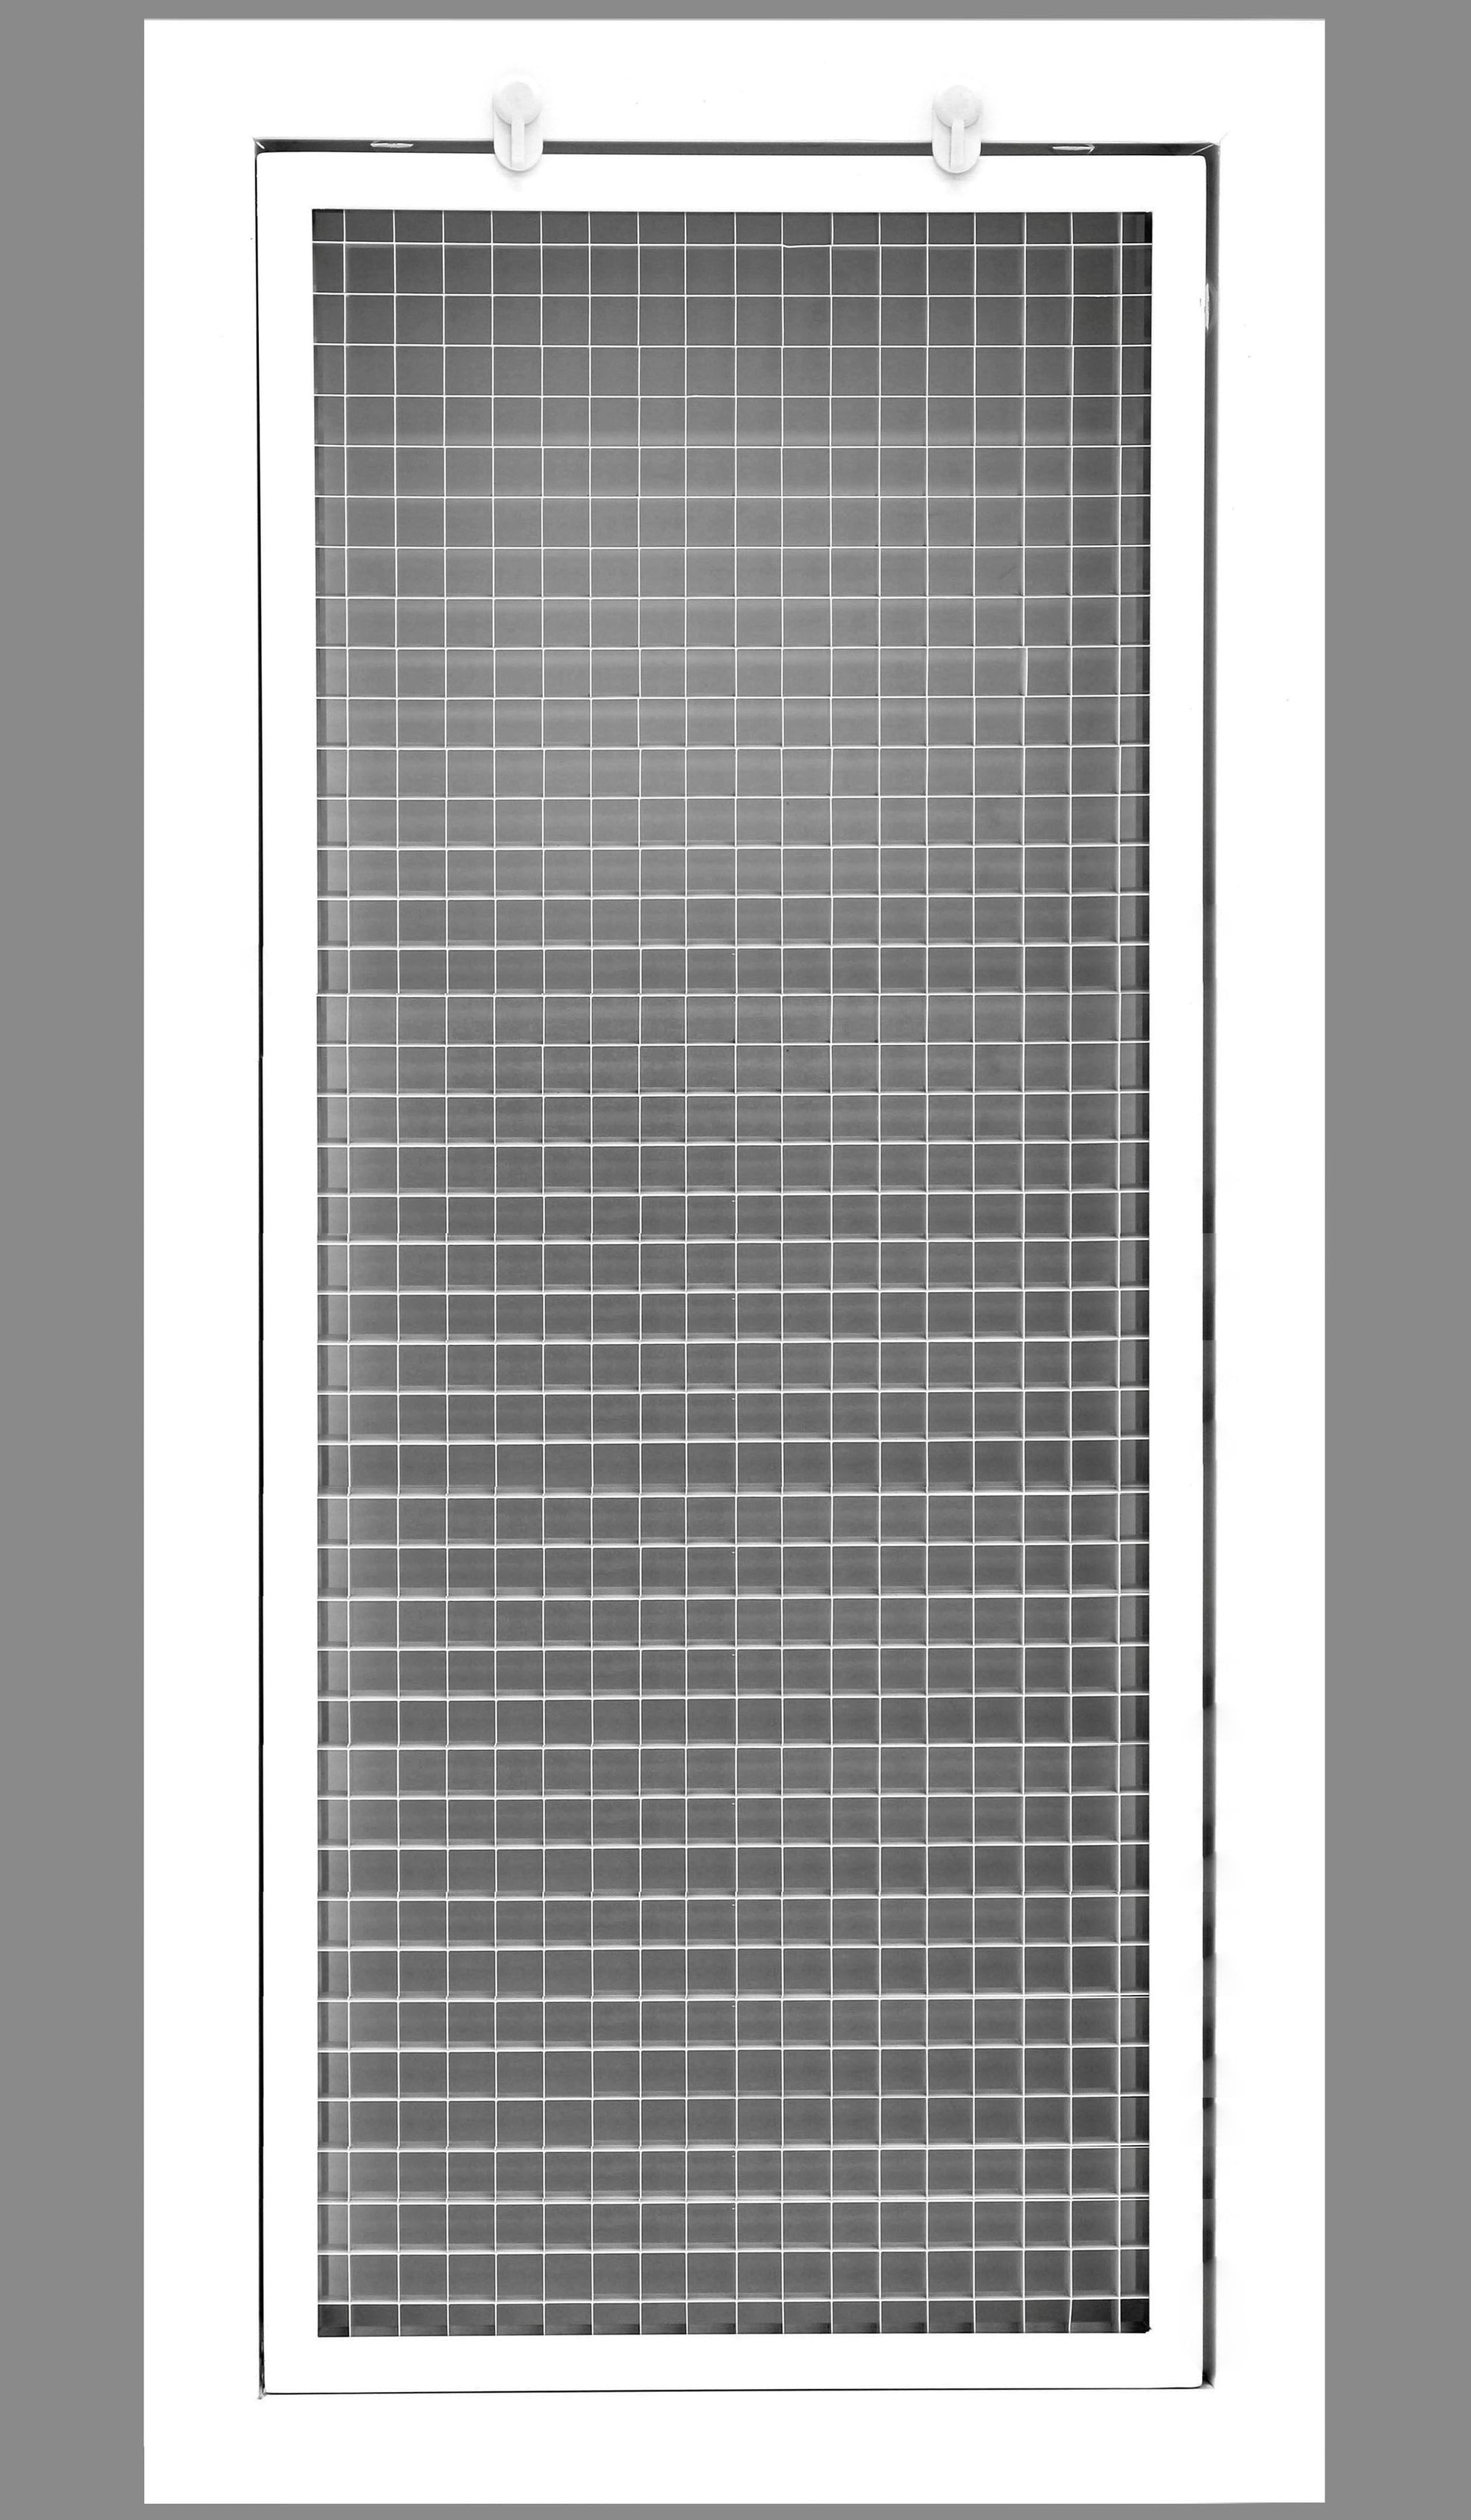 8" x 28" Cube Core Eggcrate Return Air Filter Grille for 1" Filter